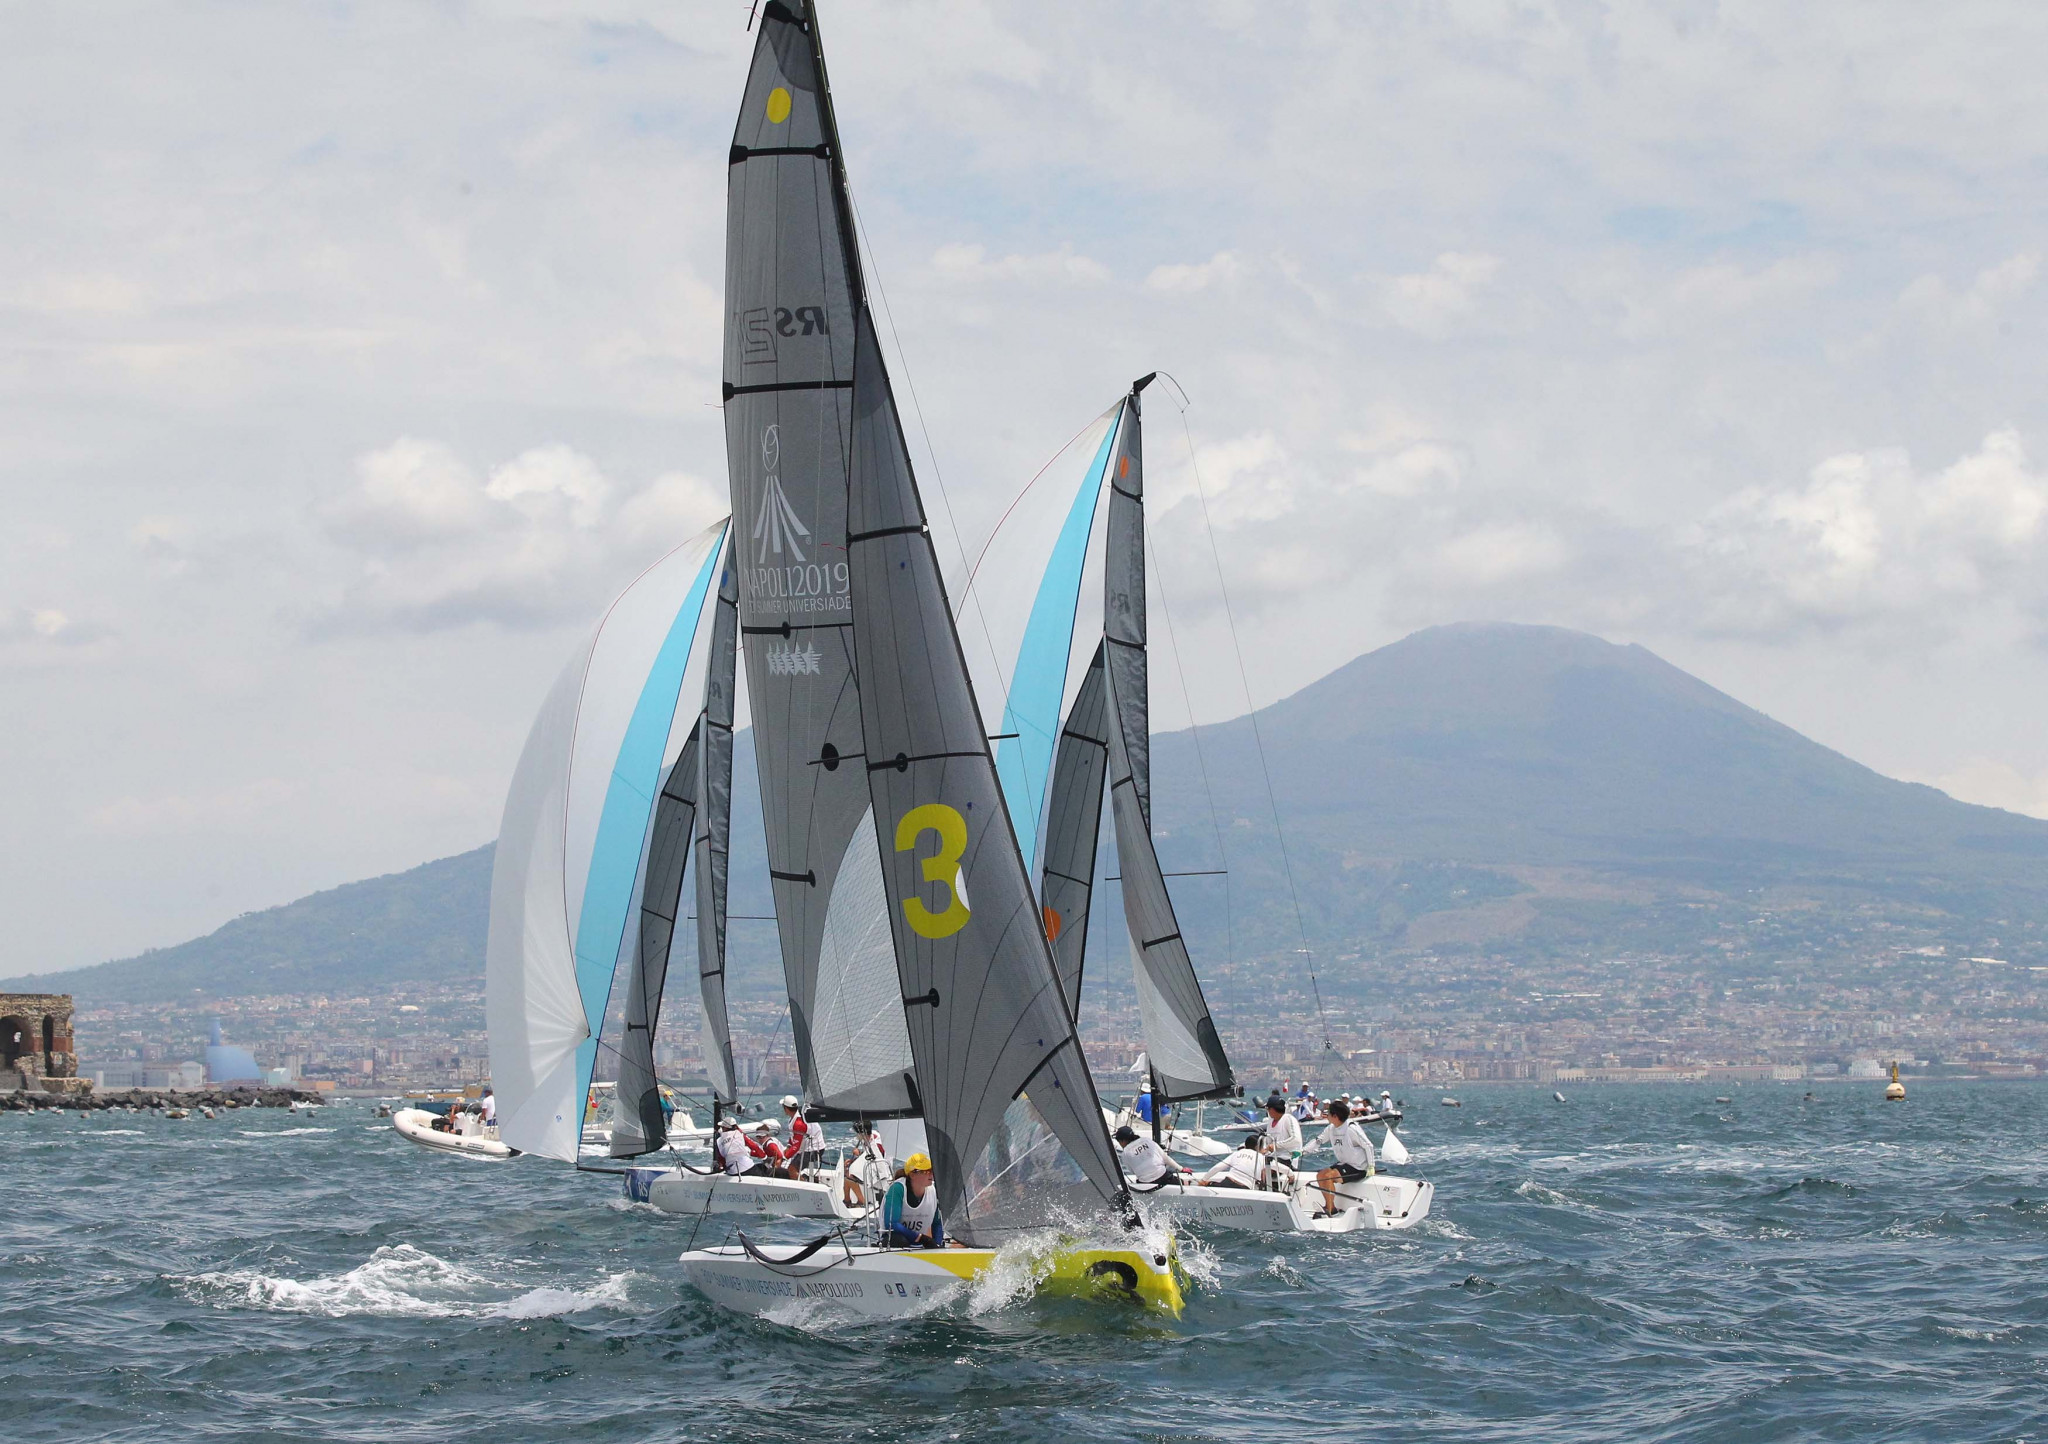 Sailors compete in the mixed fleet racing in the Bay of Naples ©Naples 2019